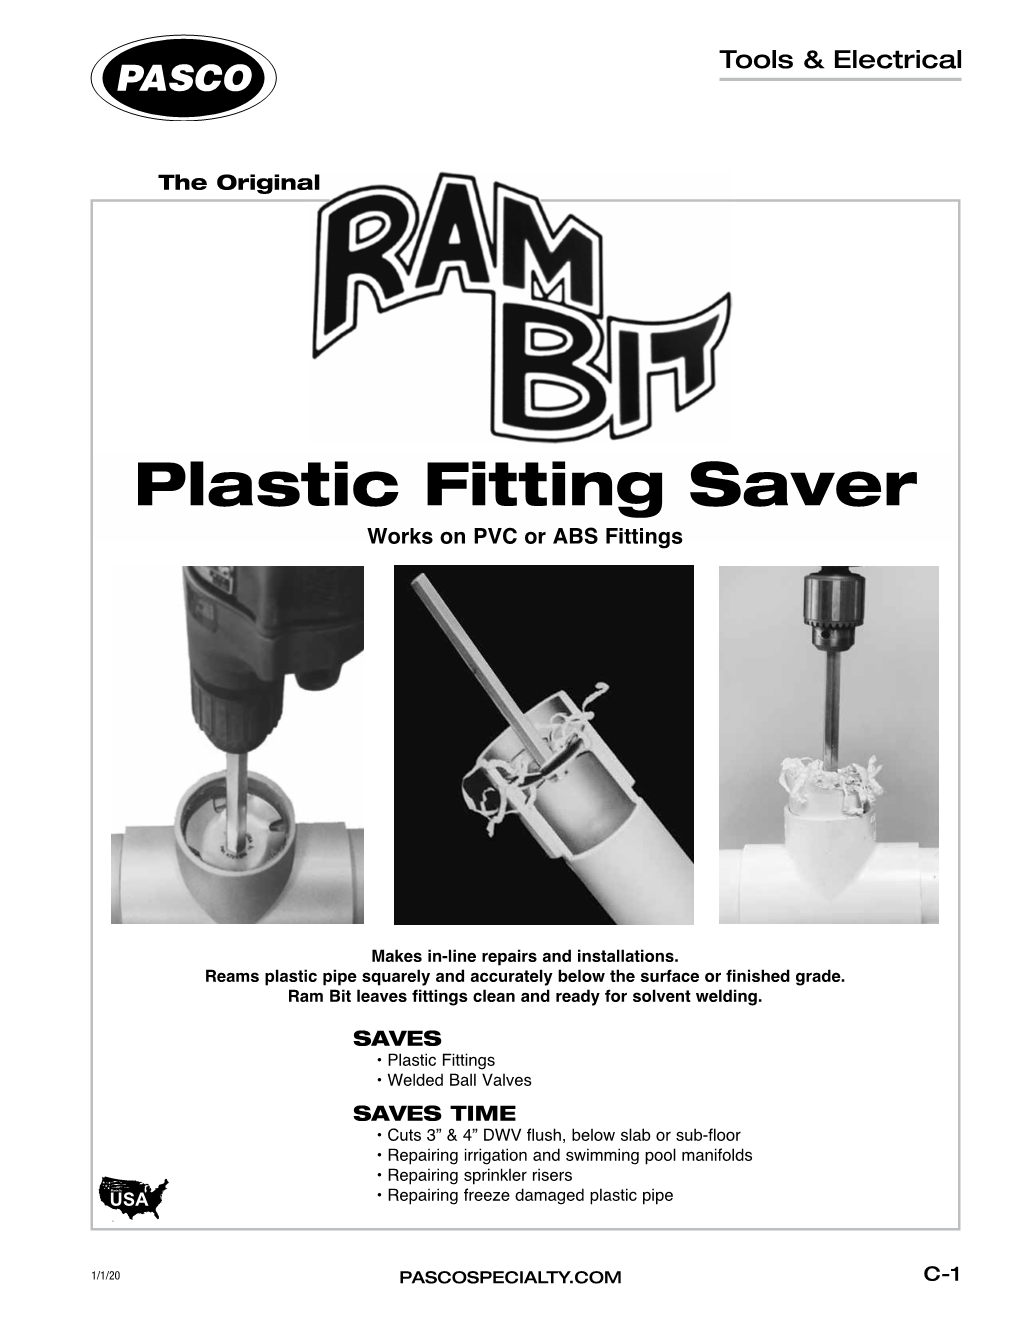 Plastic Fitting Saver Works on PVC Or ABS Fittings